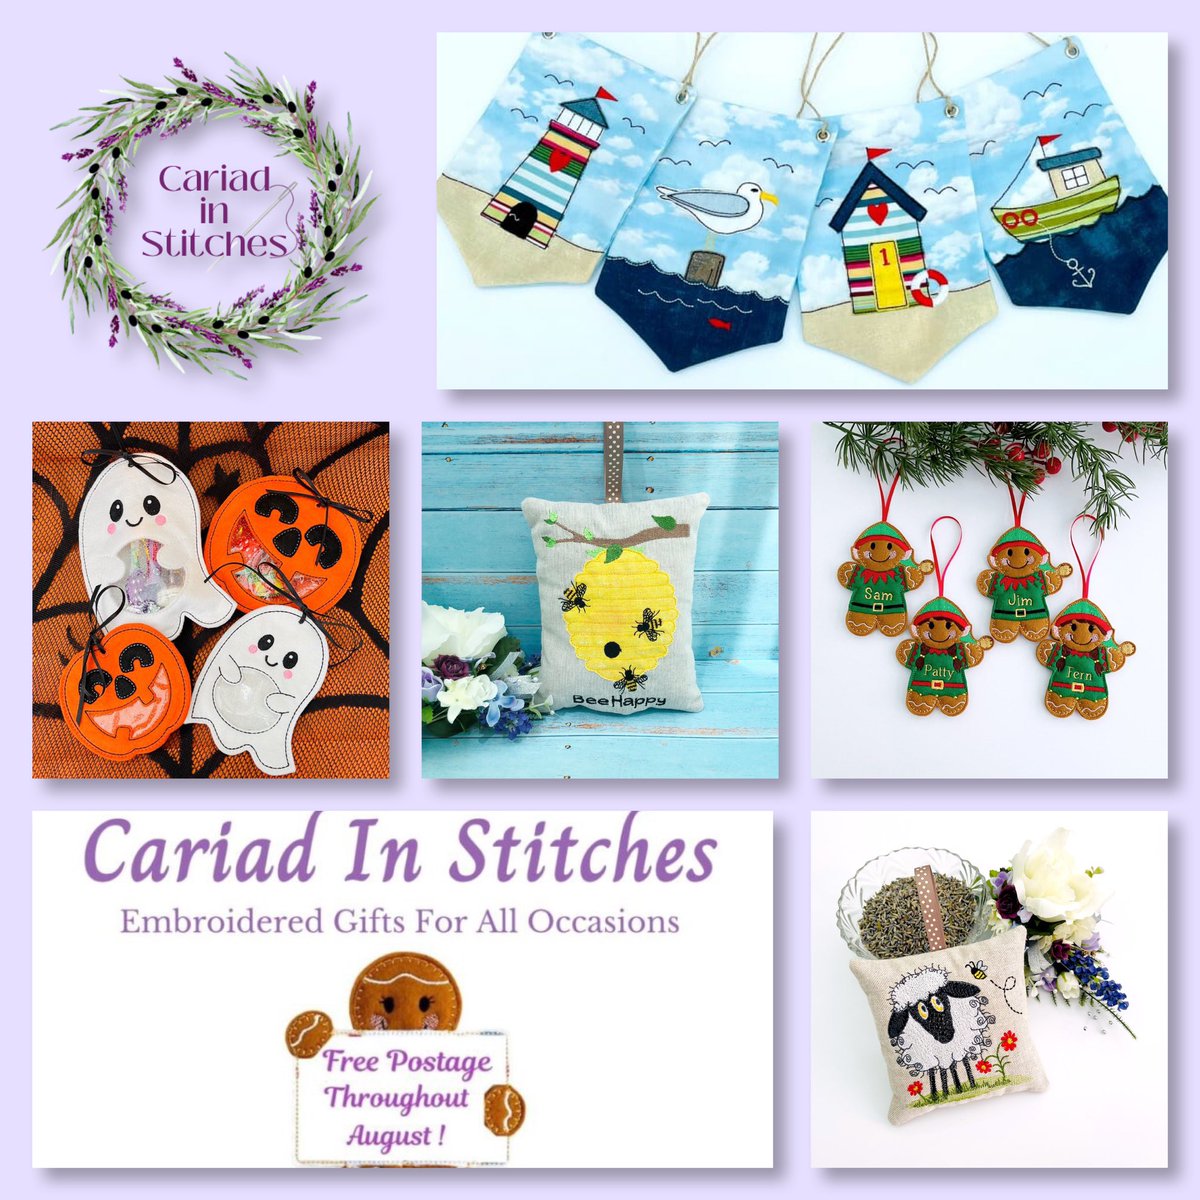 A lovely variety of gifts from @cariadinstitch1 #tbchboosters #giftidea #letterboxgifts